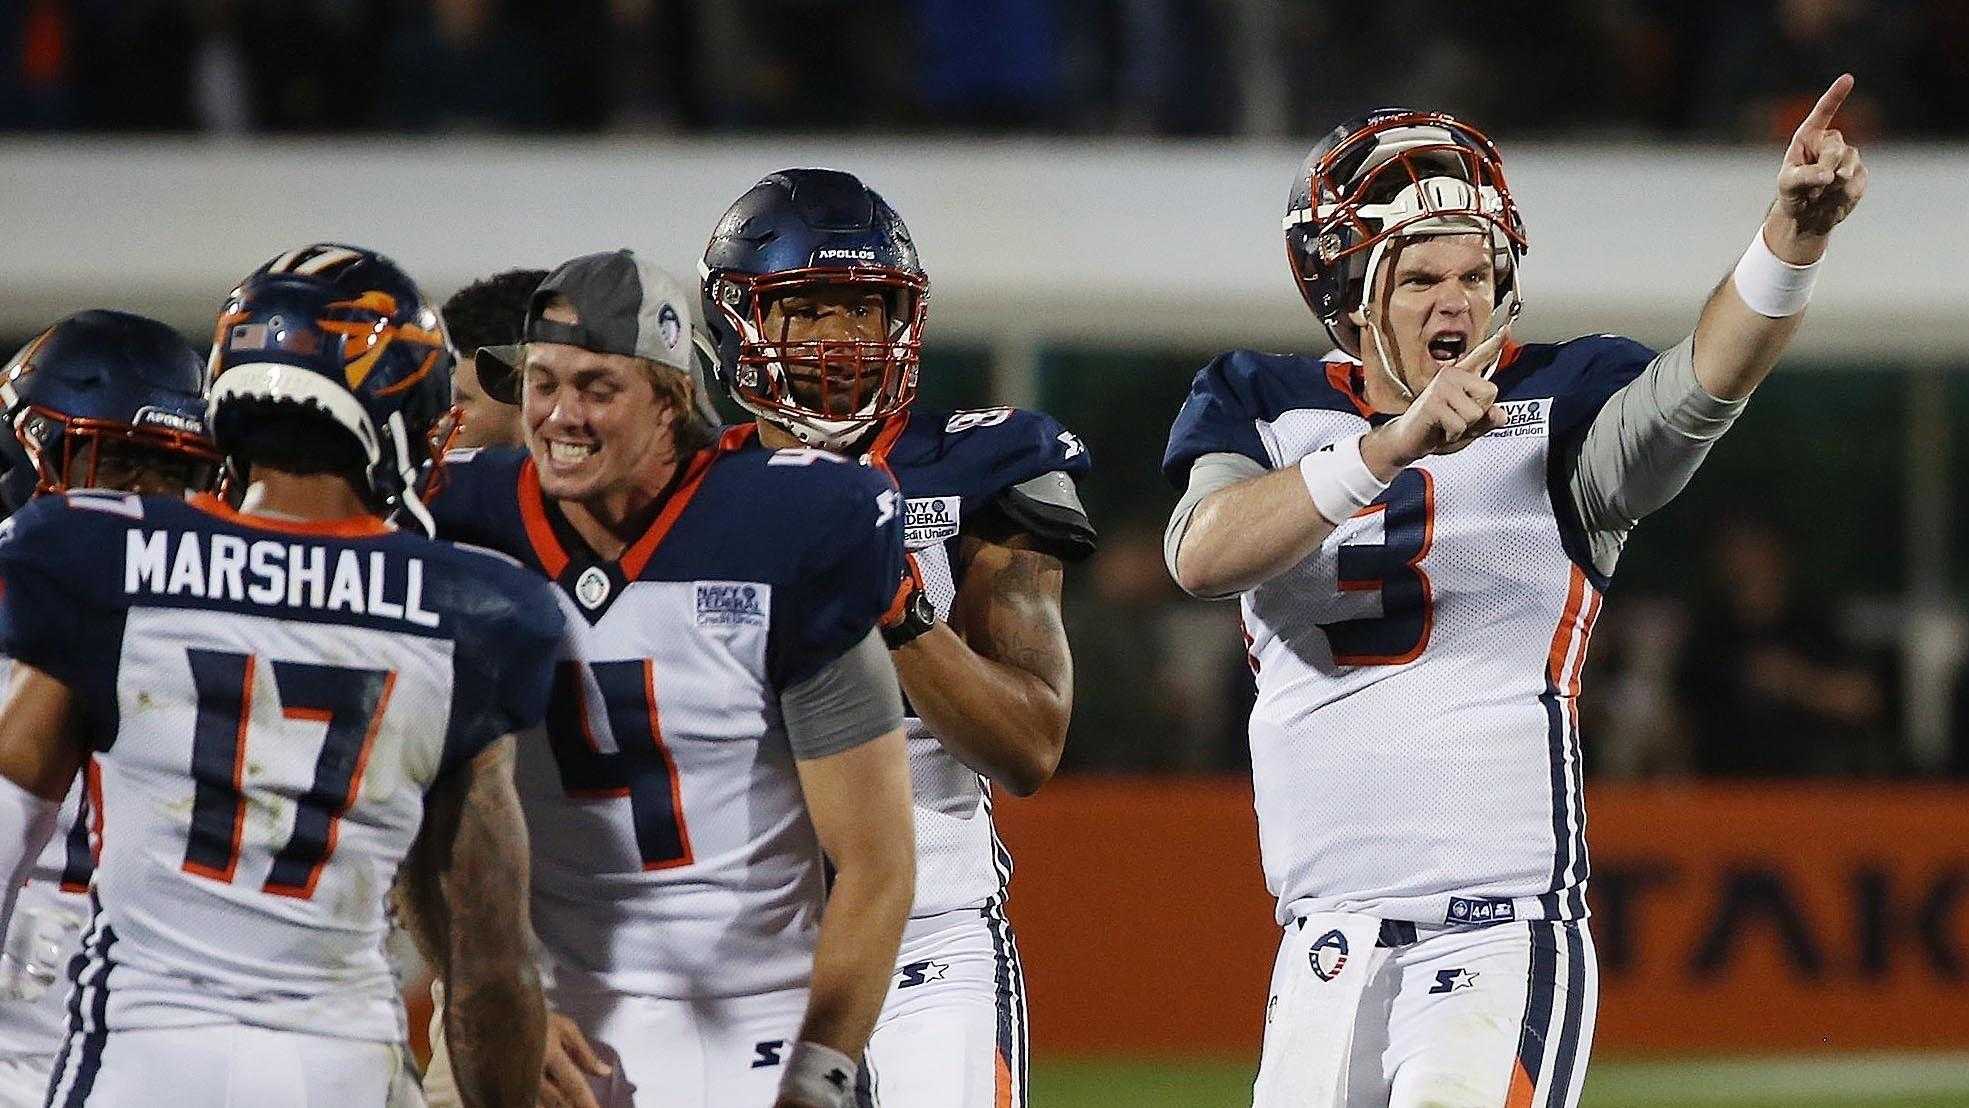  The Orlando Apollos of the AAF are the next great dynasty.